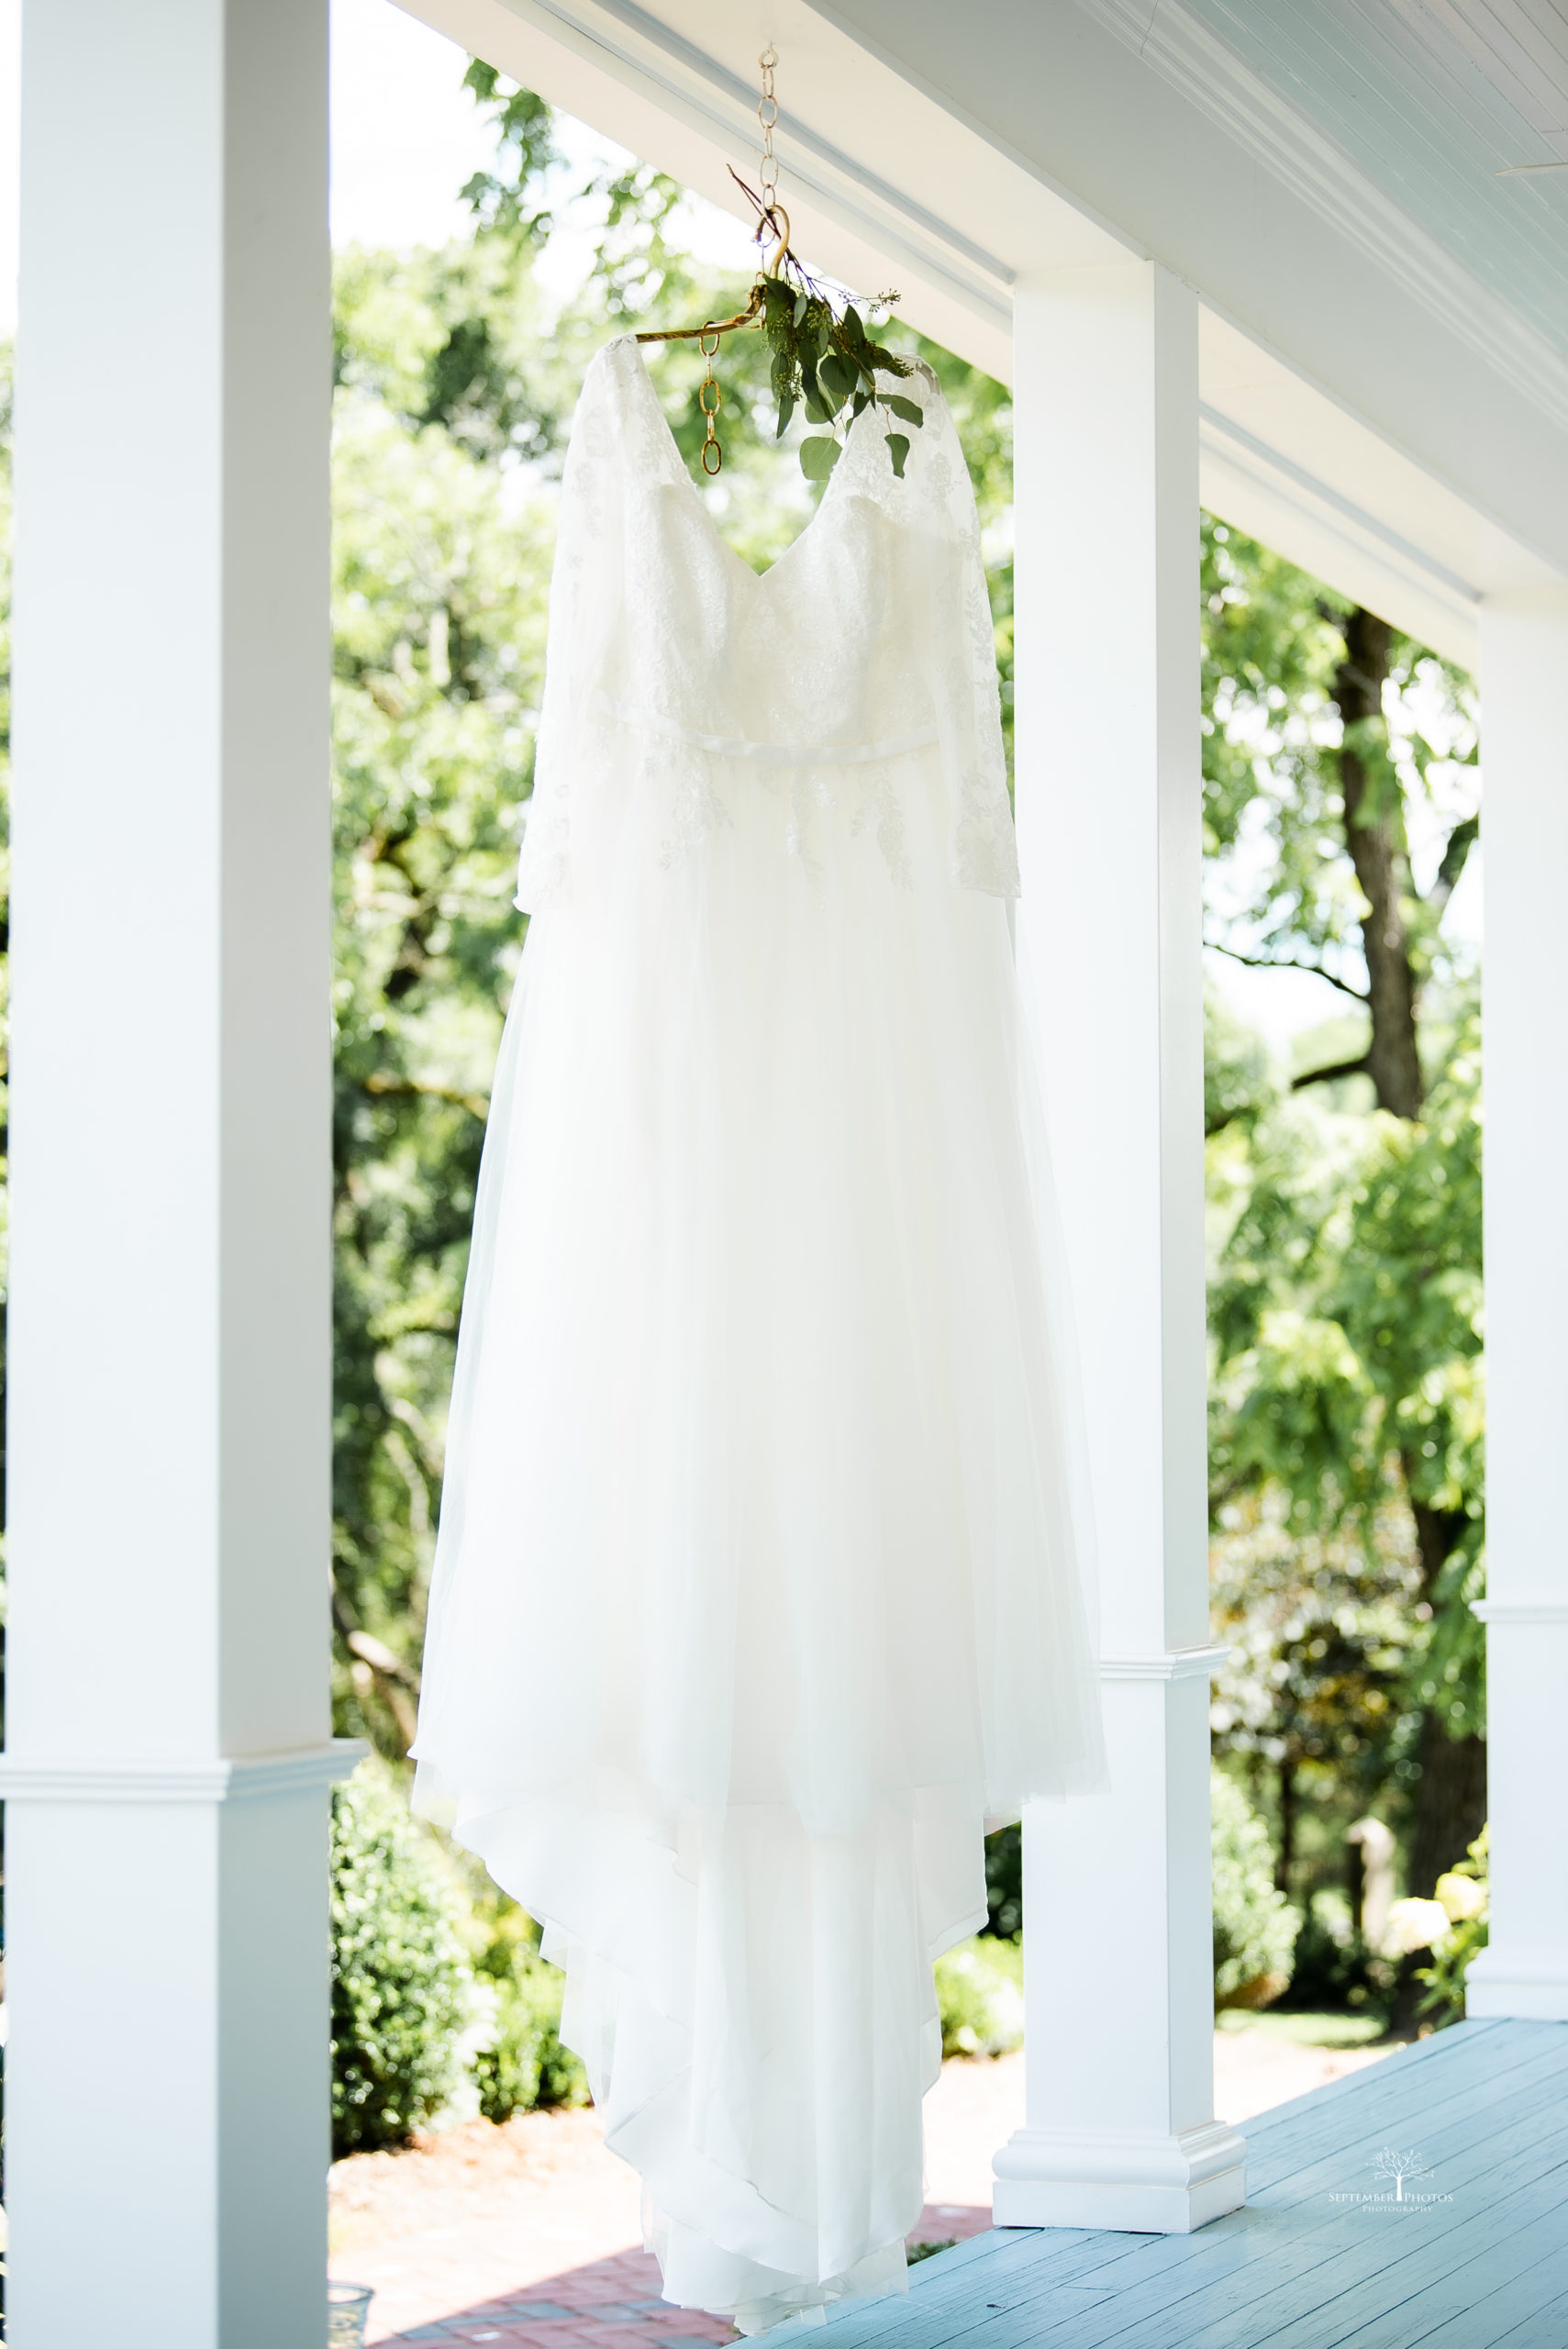 Samantha beautiful gown for her Blush, navy, and gold wedding at Walnut Hill.